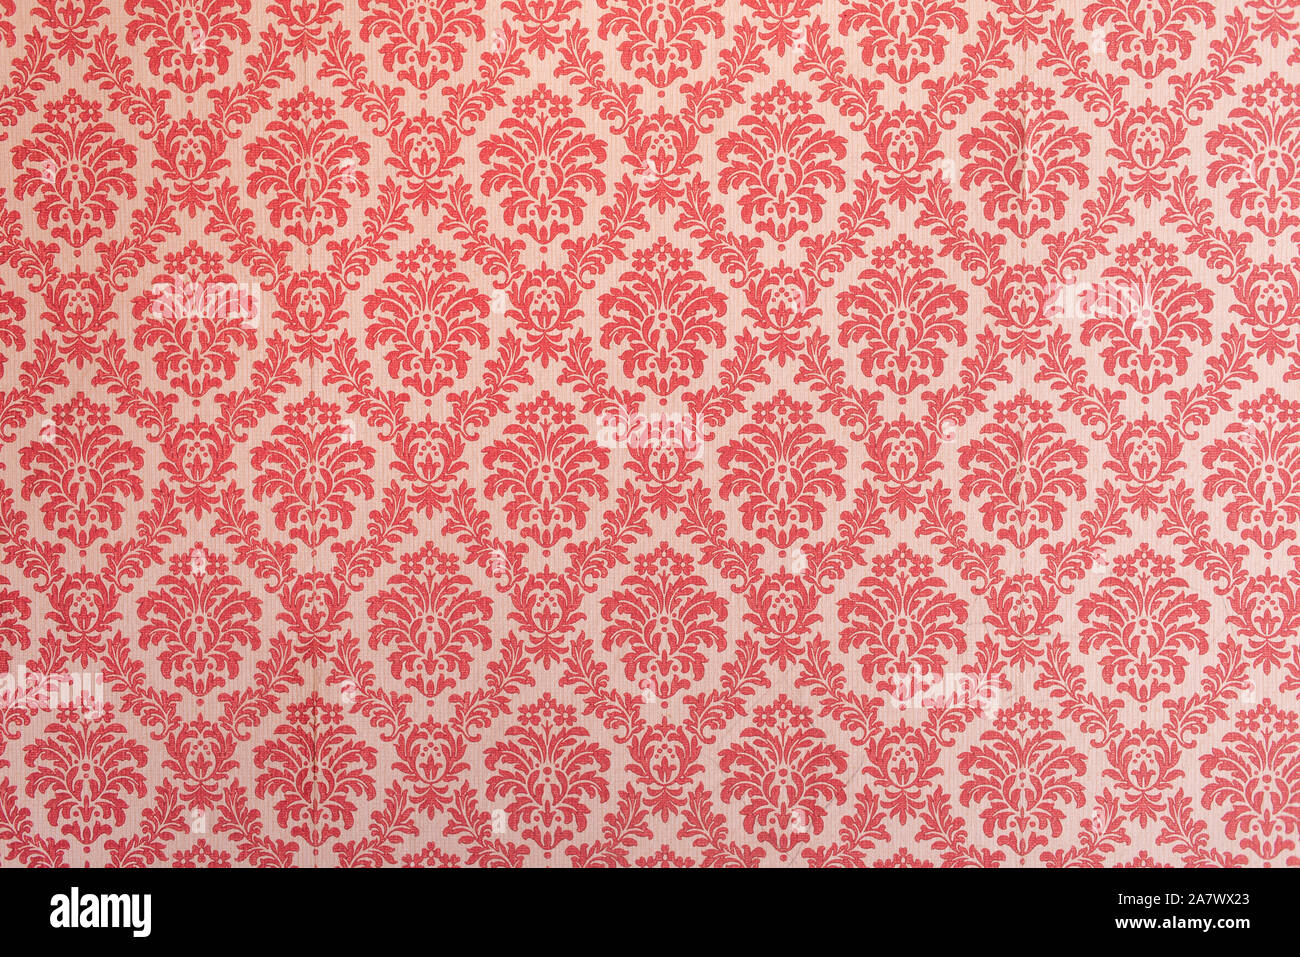 Red wallpaper vintage flock with red damask design on a white background retro vintage style Stock Photo